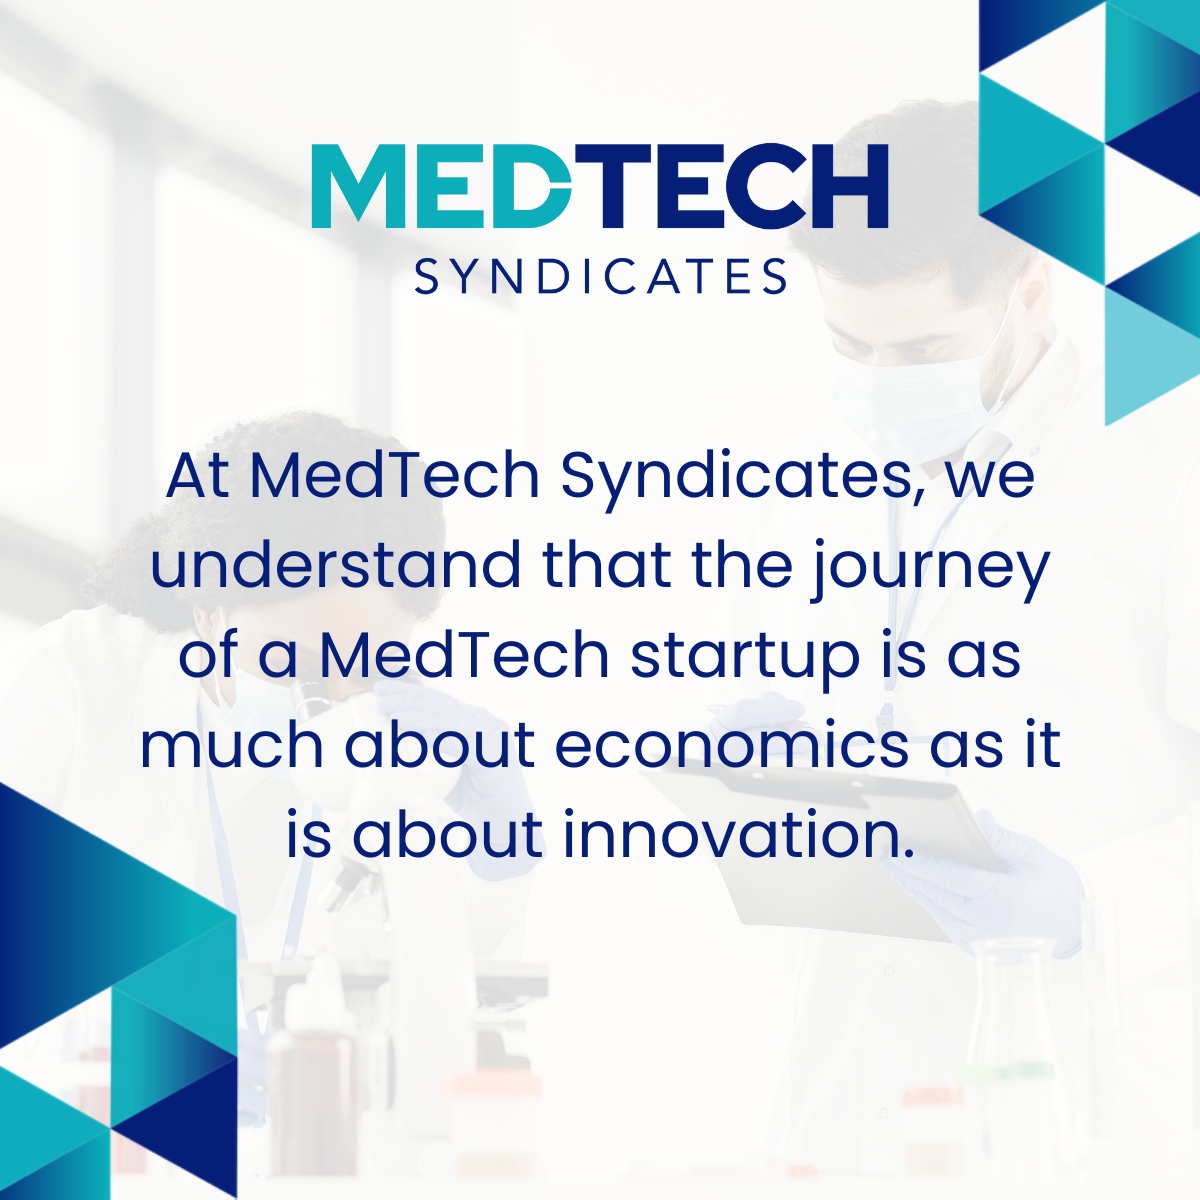 At MedTech Syndicates, we understand that the journey of a MedTech startup is as much about economics as it is about innovation. We recognise the critical role of Healthcare Economics in navigating this intricate path. #MedTechSyndicates #HealthcareEconomics #Innovation #Heal...